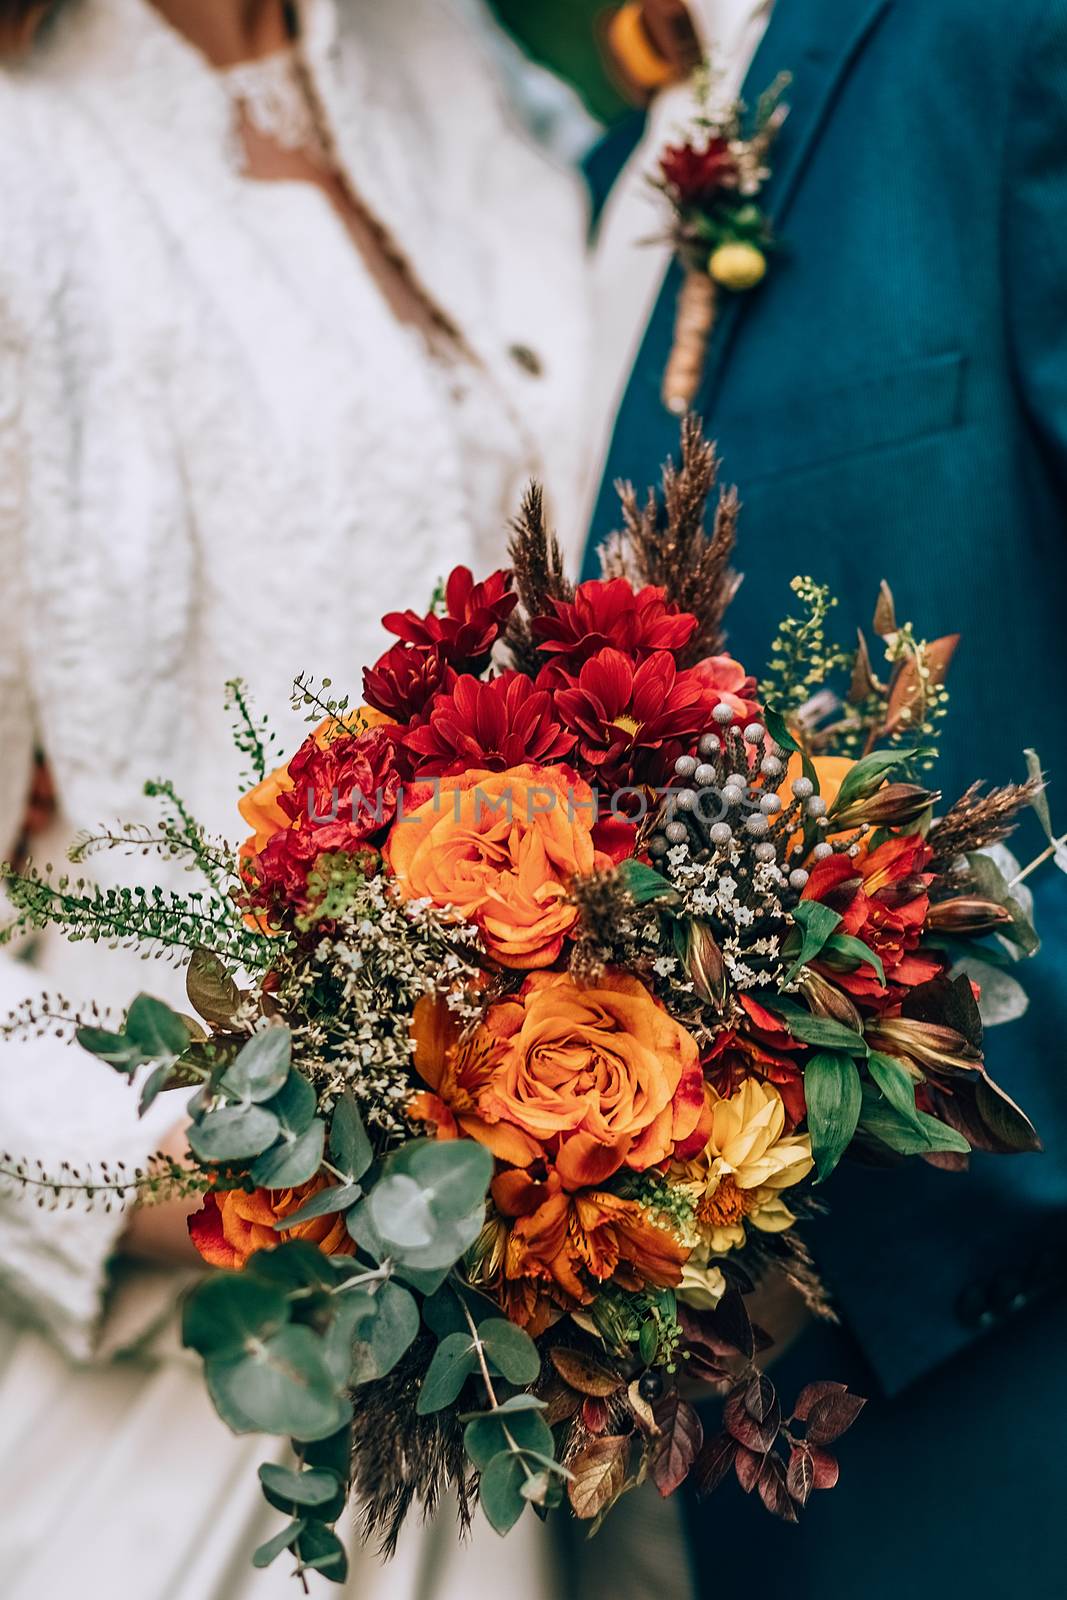 Amazing wedding bouquet with vibrant flowers and green and brown herbs by 3KStudio